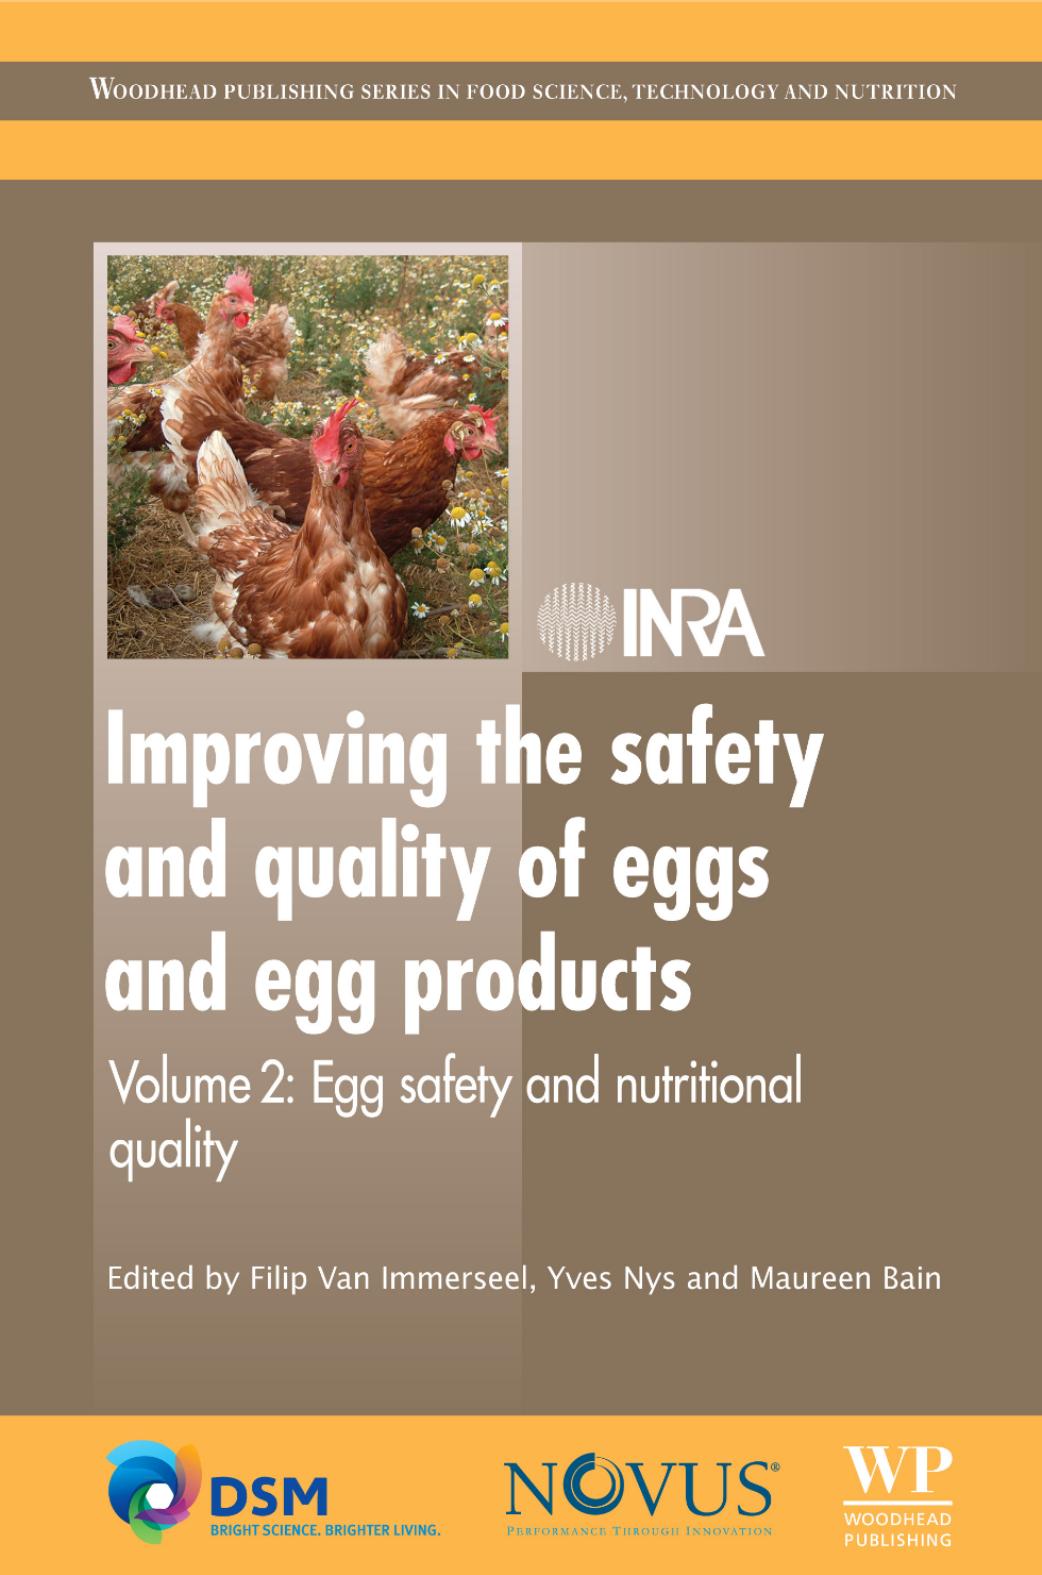 Improving the Safety and Quality of Eggs and Egg Products  Volume 2  Egg safety and nutritional quality. 2011